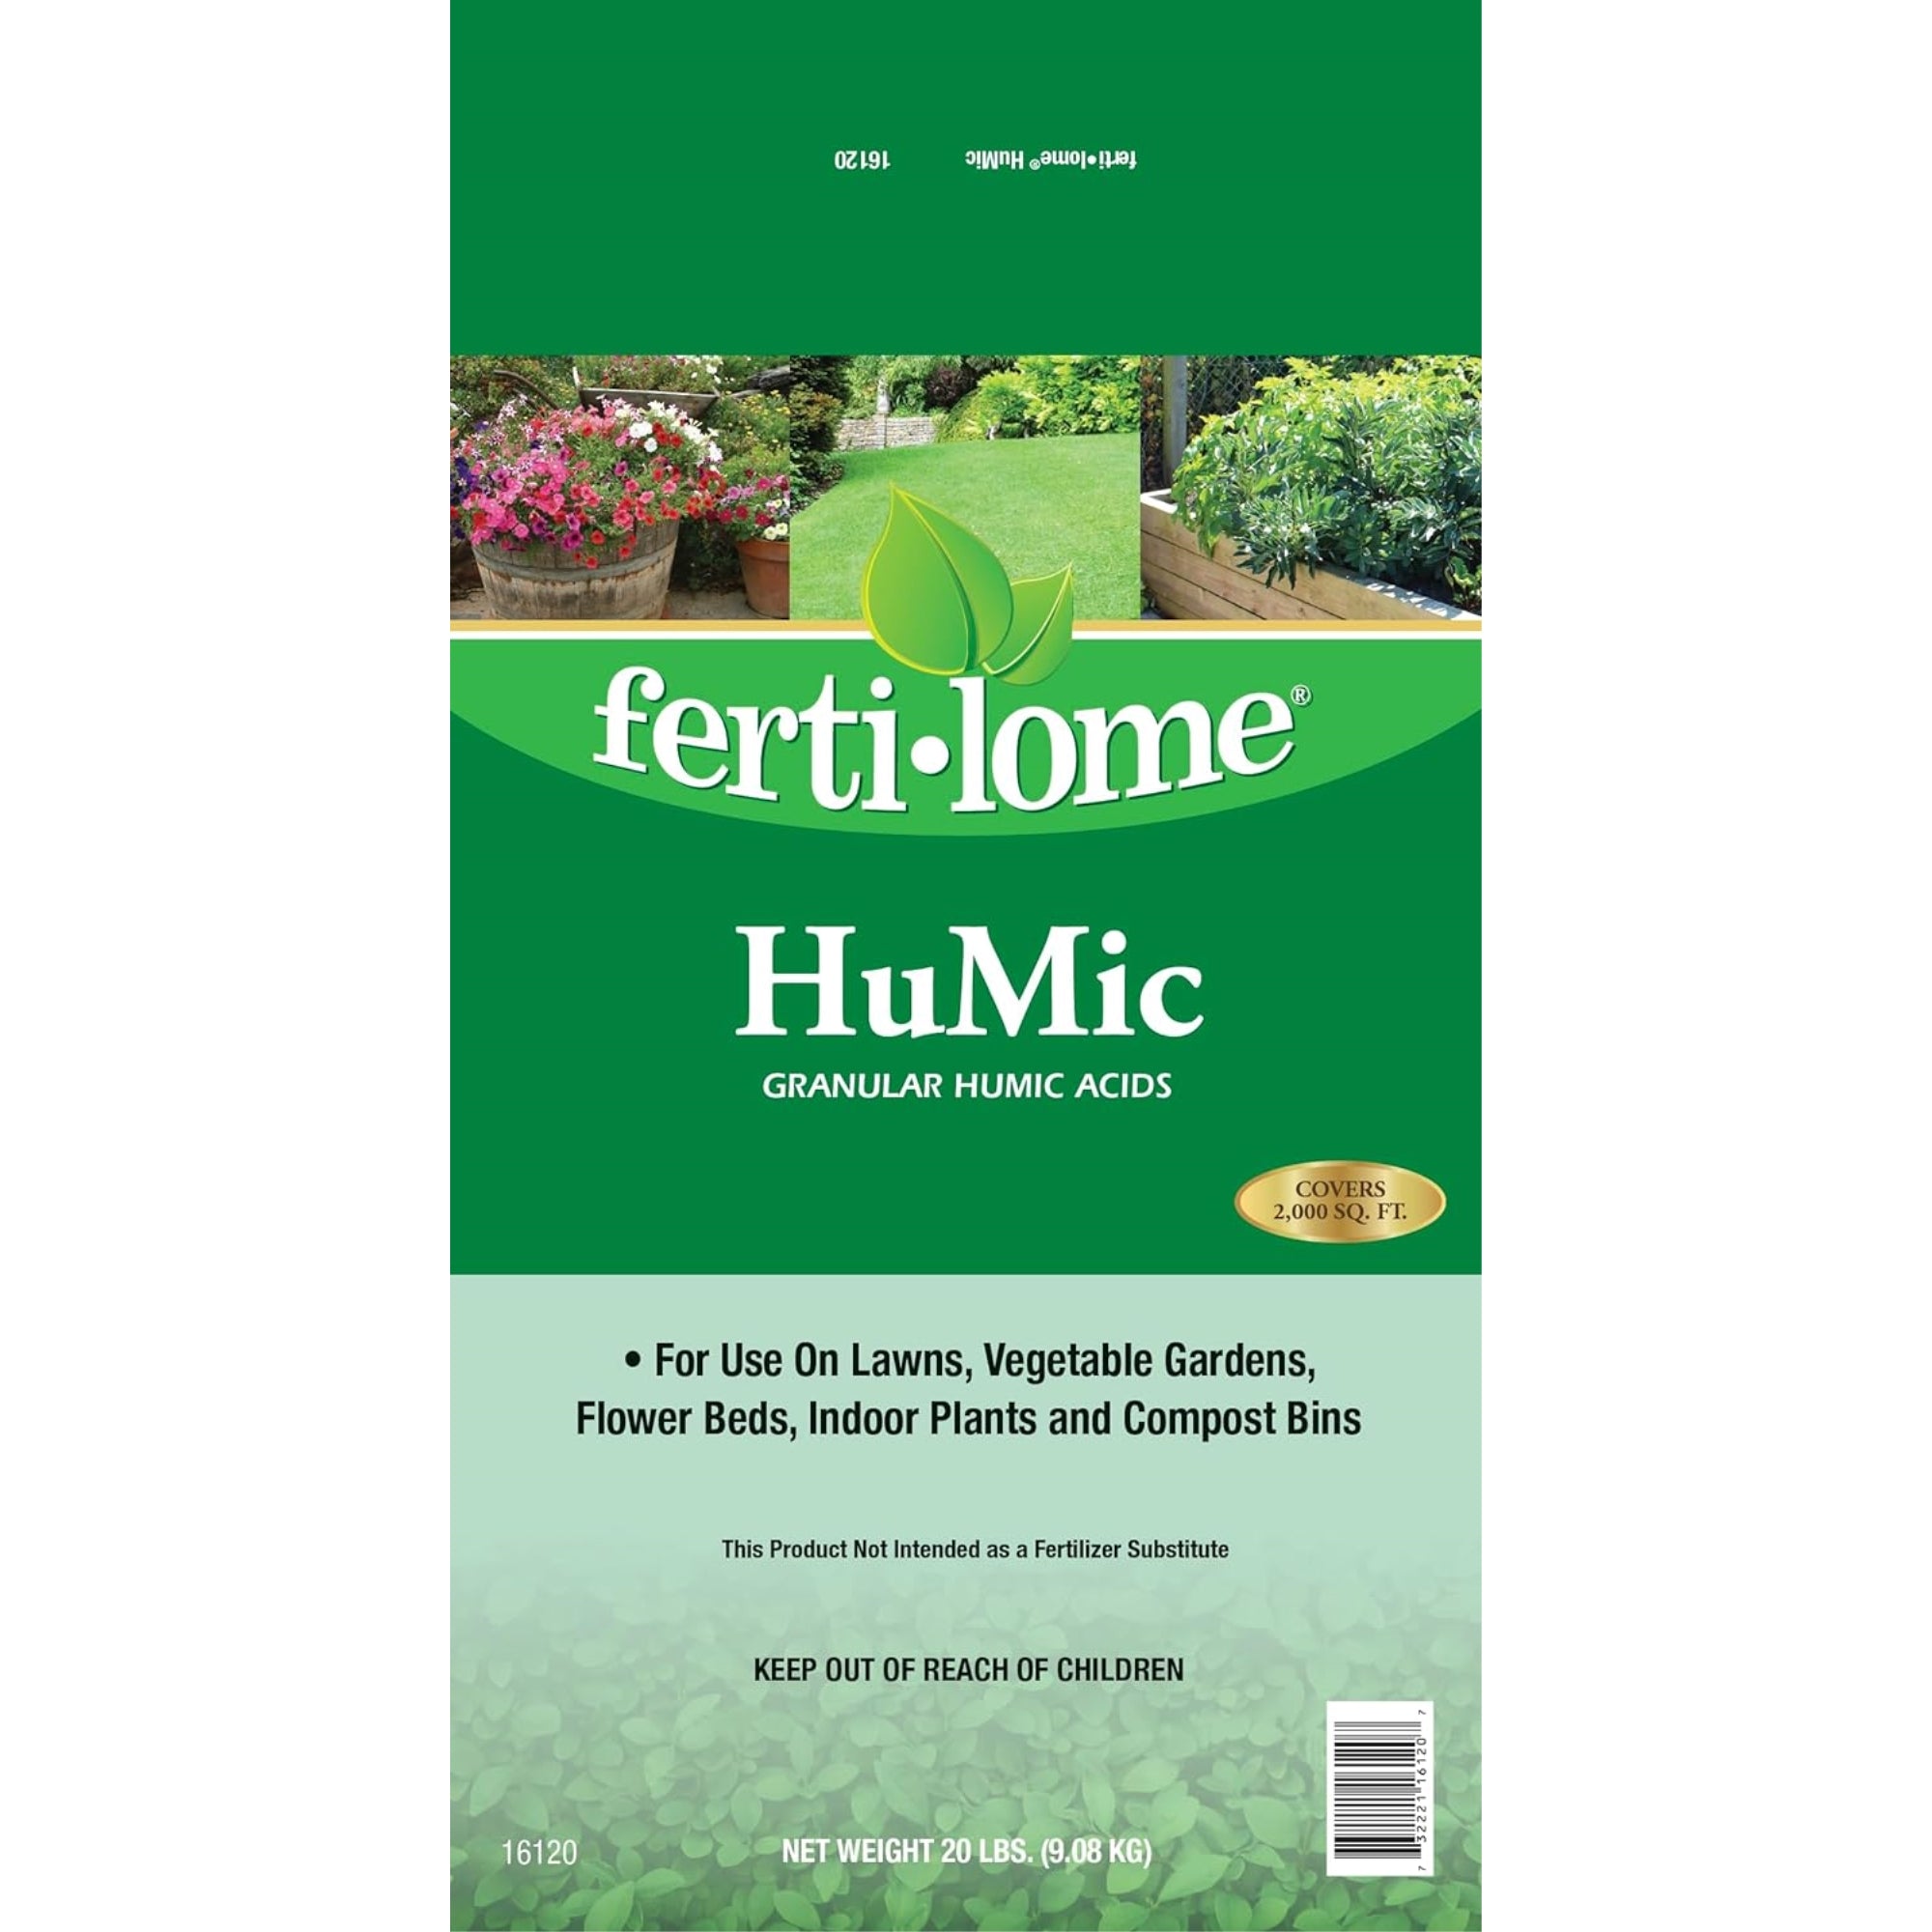 Fertilome Granular Humic Acid Soil Amendment for use on Lawns, Flower Bed, Indoor Plants, and More